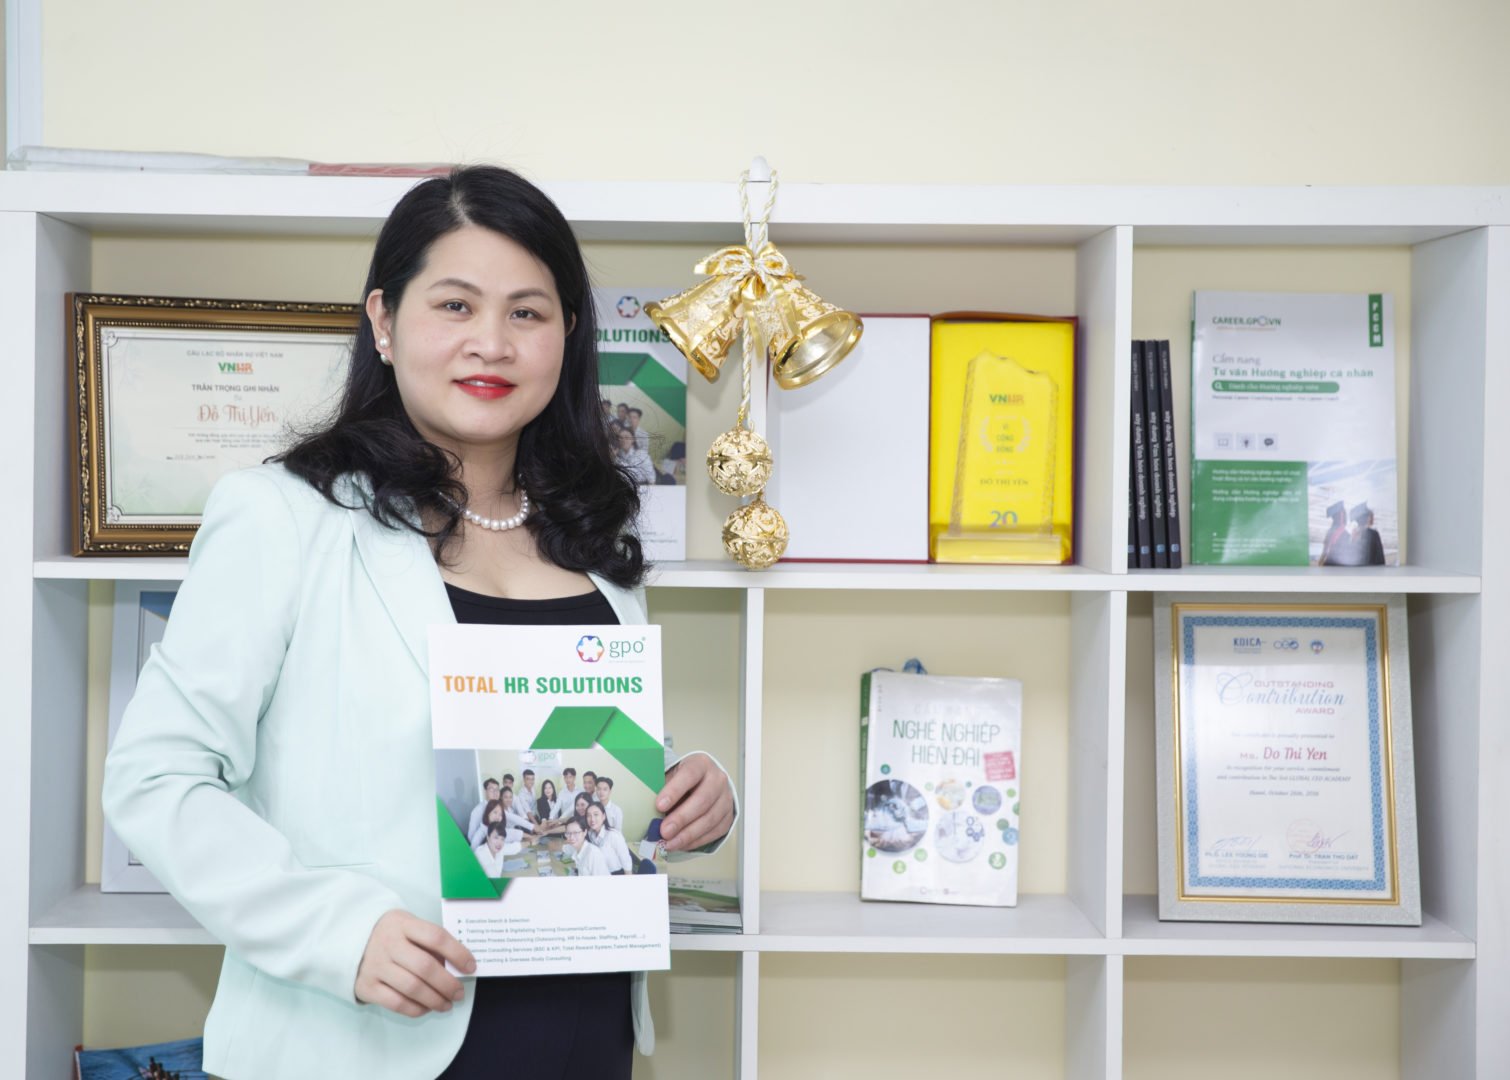 Yen Do WEAVE alumna and woman entrepreneur from Vietnam poses with a brochure for her company, GPO